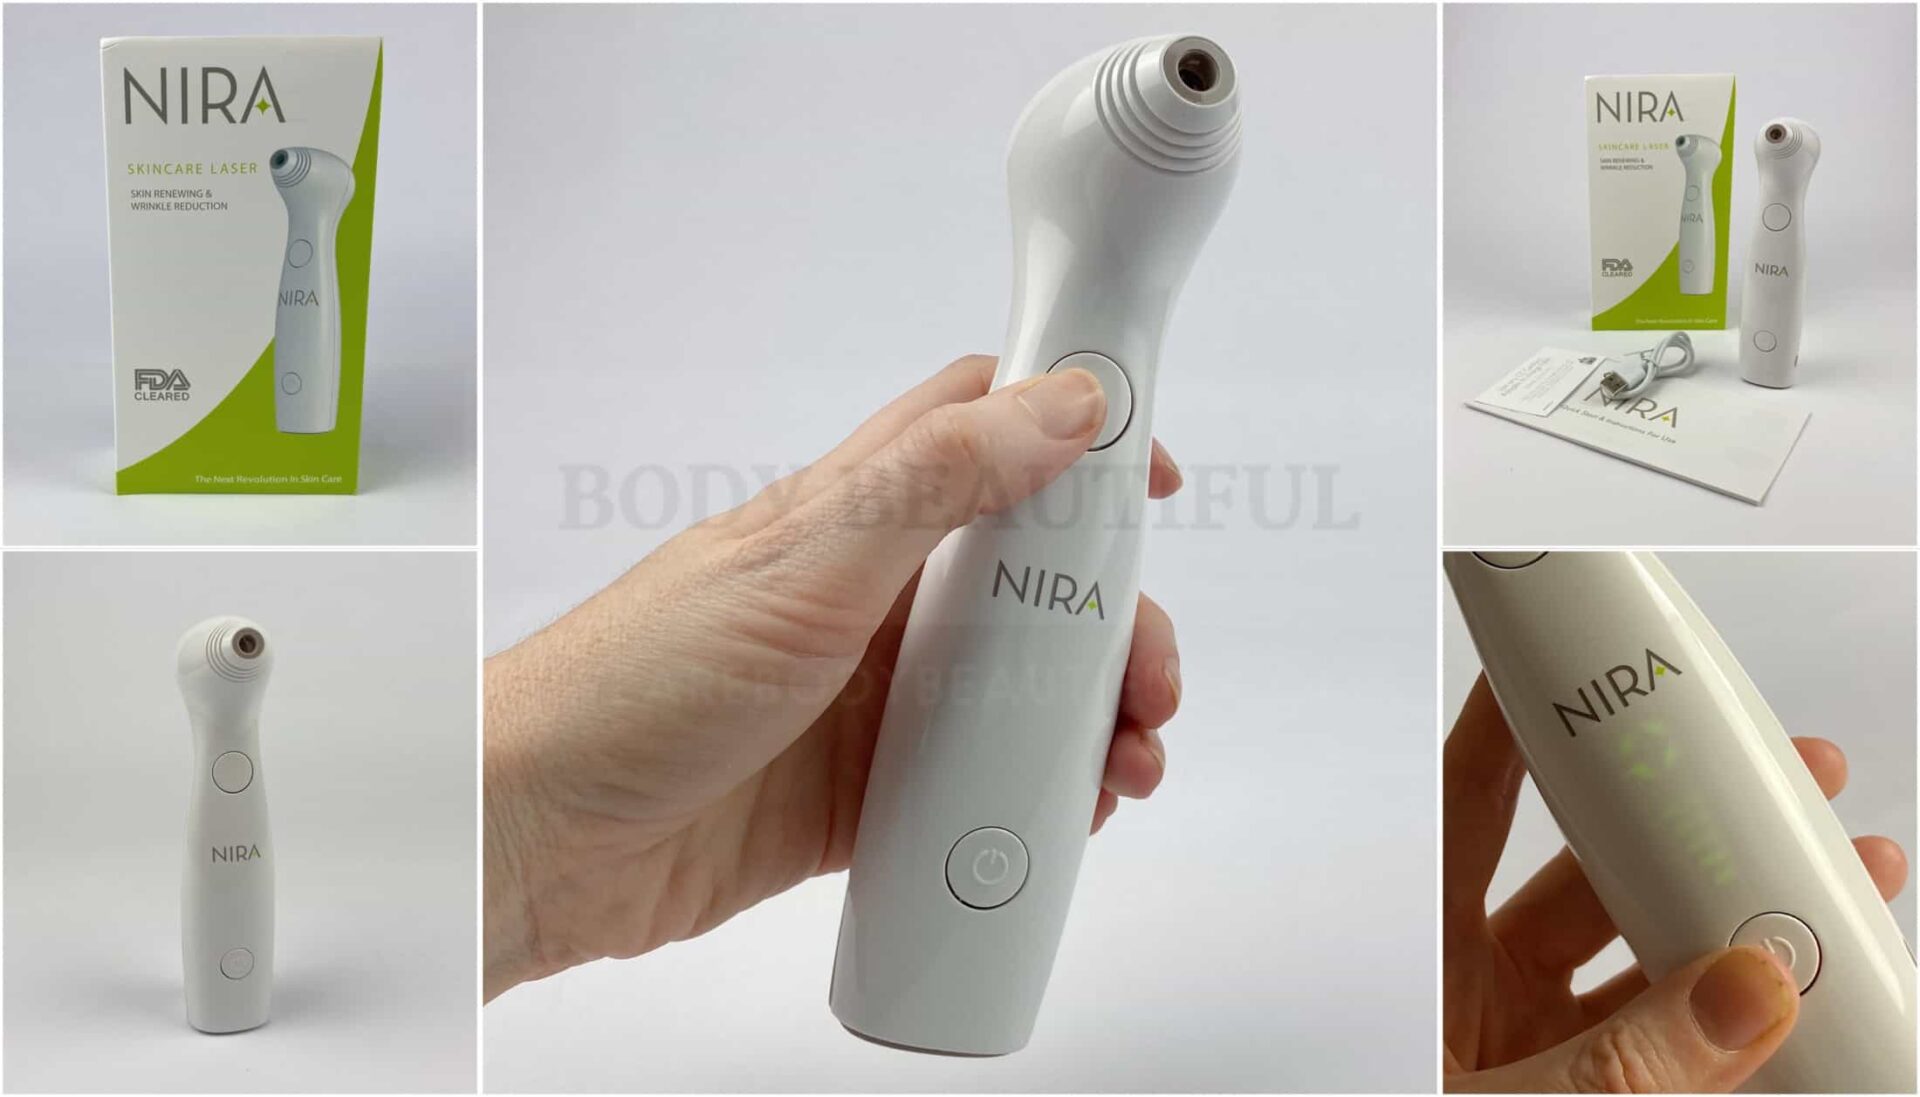 NIRA Skincare anti-aging home laser review tried & tested by weAreBodyBeautiful.com